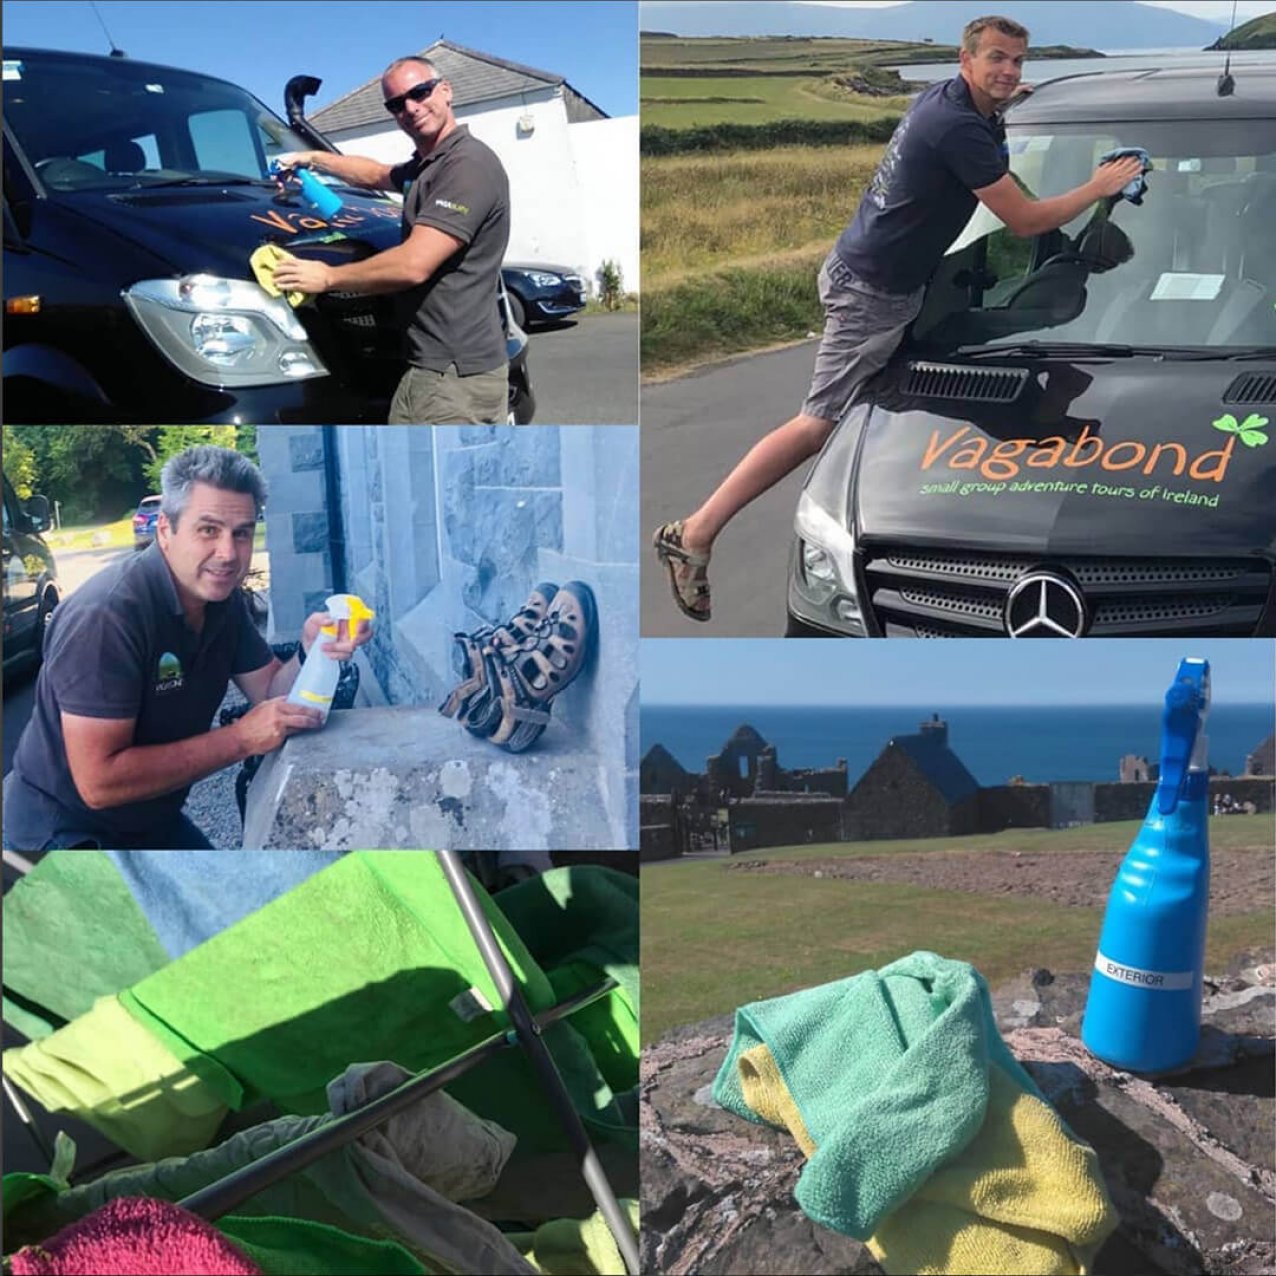 Collage of Vagabond Tours of Ireland guides cleaning buses